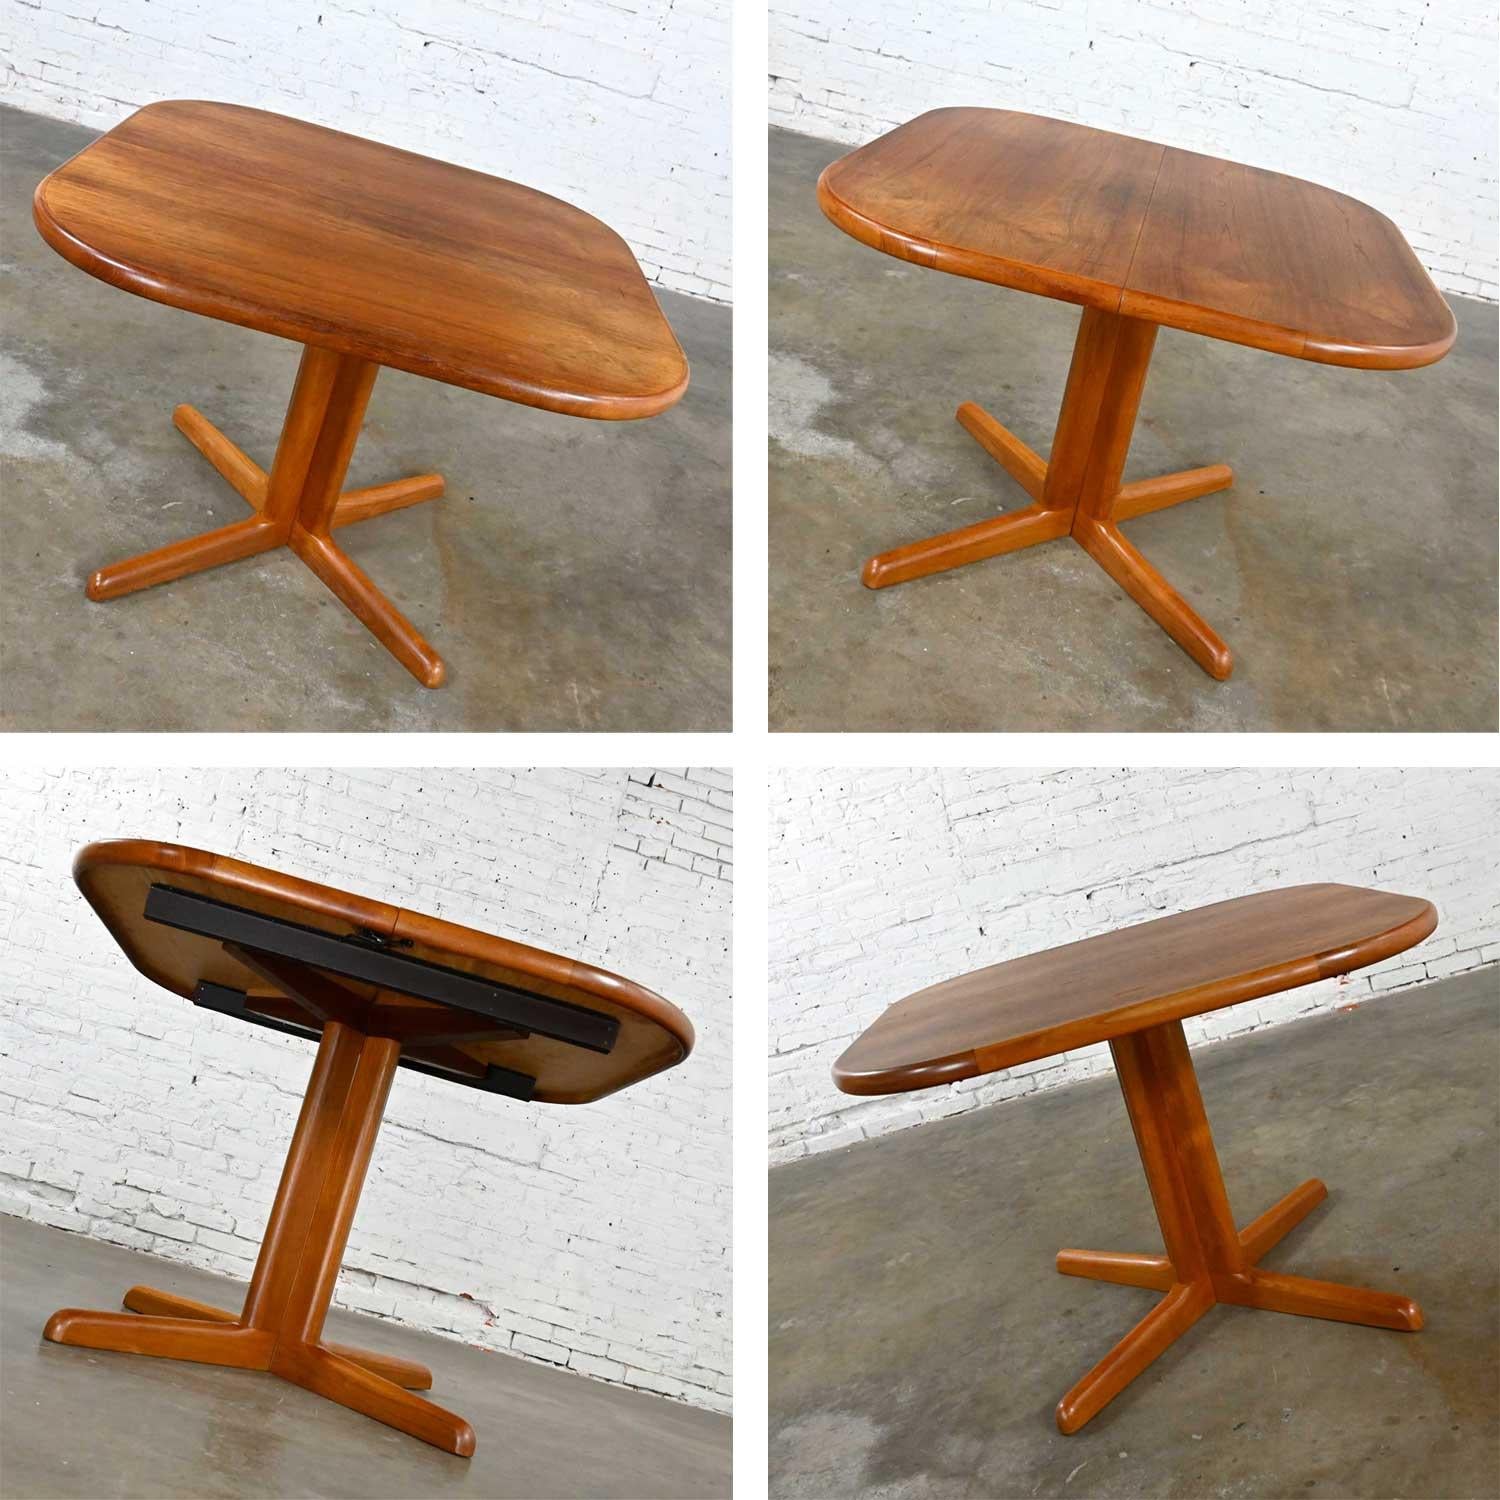 20th Century Teak Scandinavian Modern Expanding Dining Table 2 Leaves Style Niels Moller For Sale